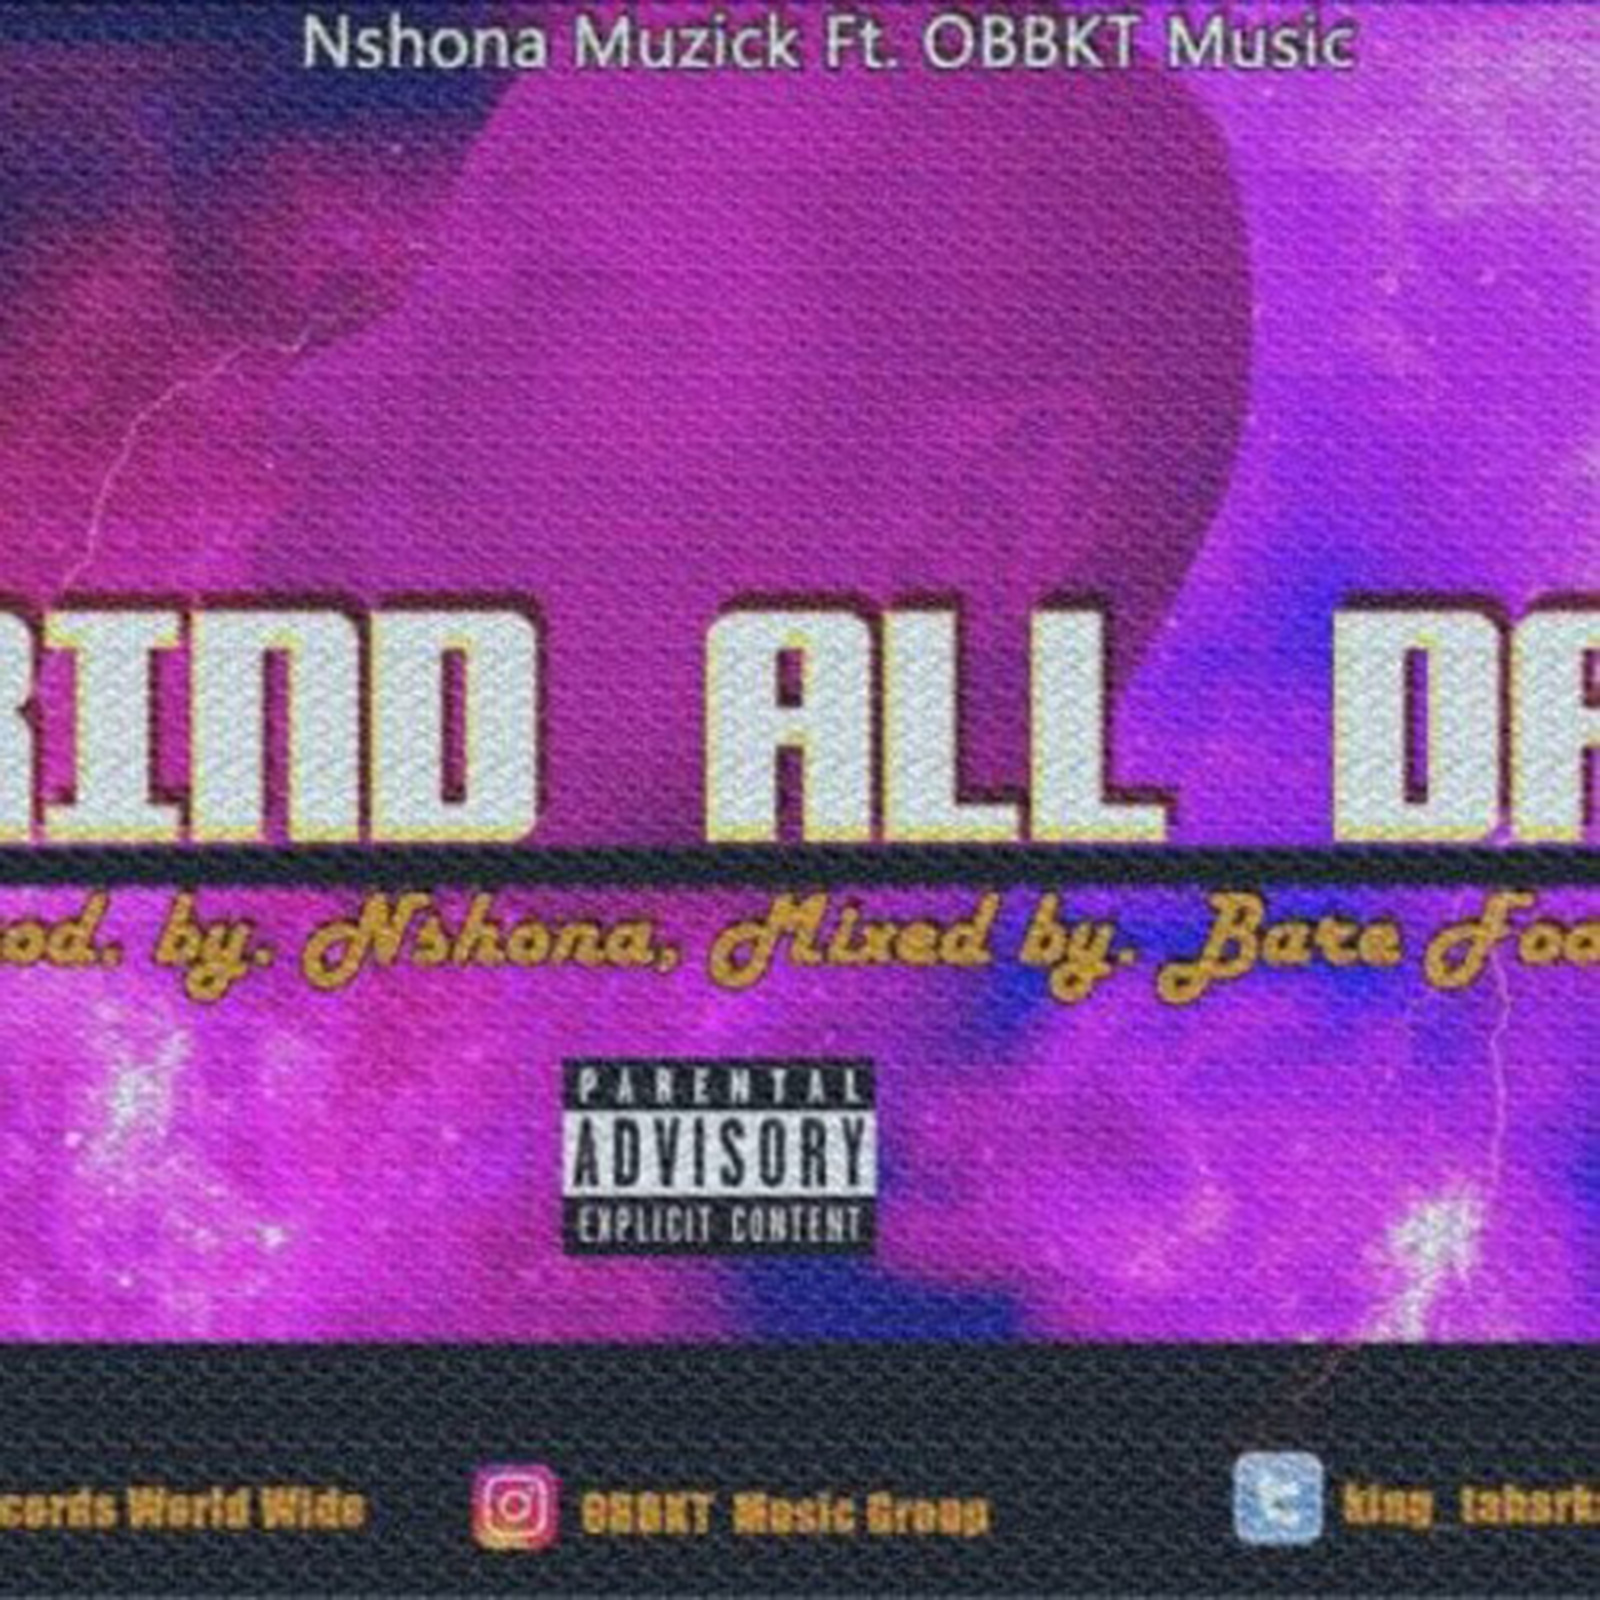 Grind All Day by Nshona Muzick feat. OBBKT Music